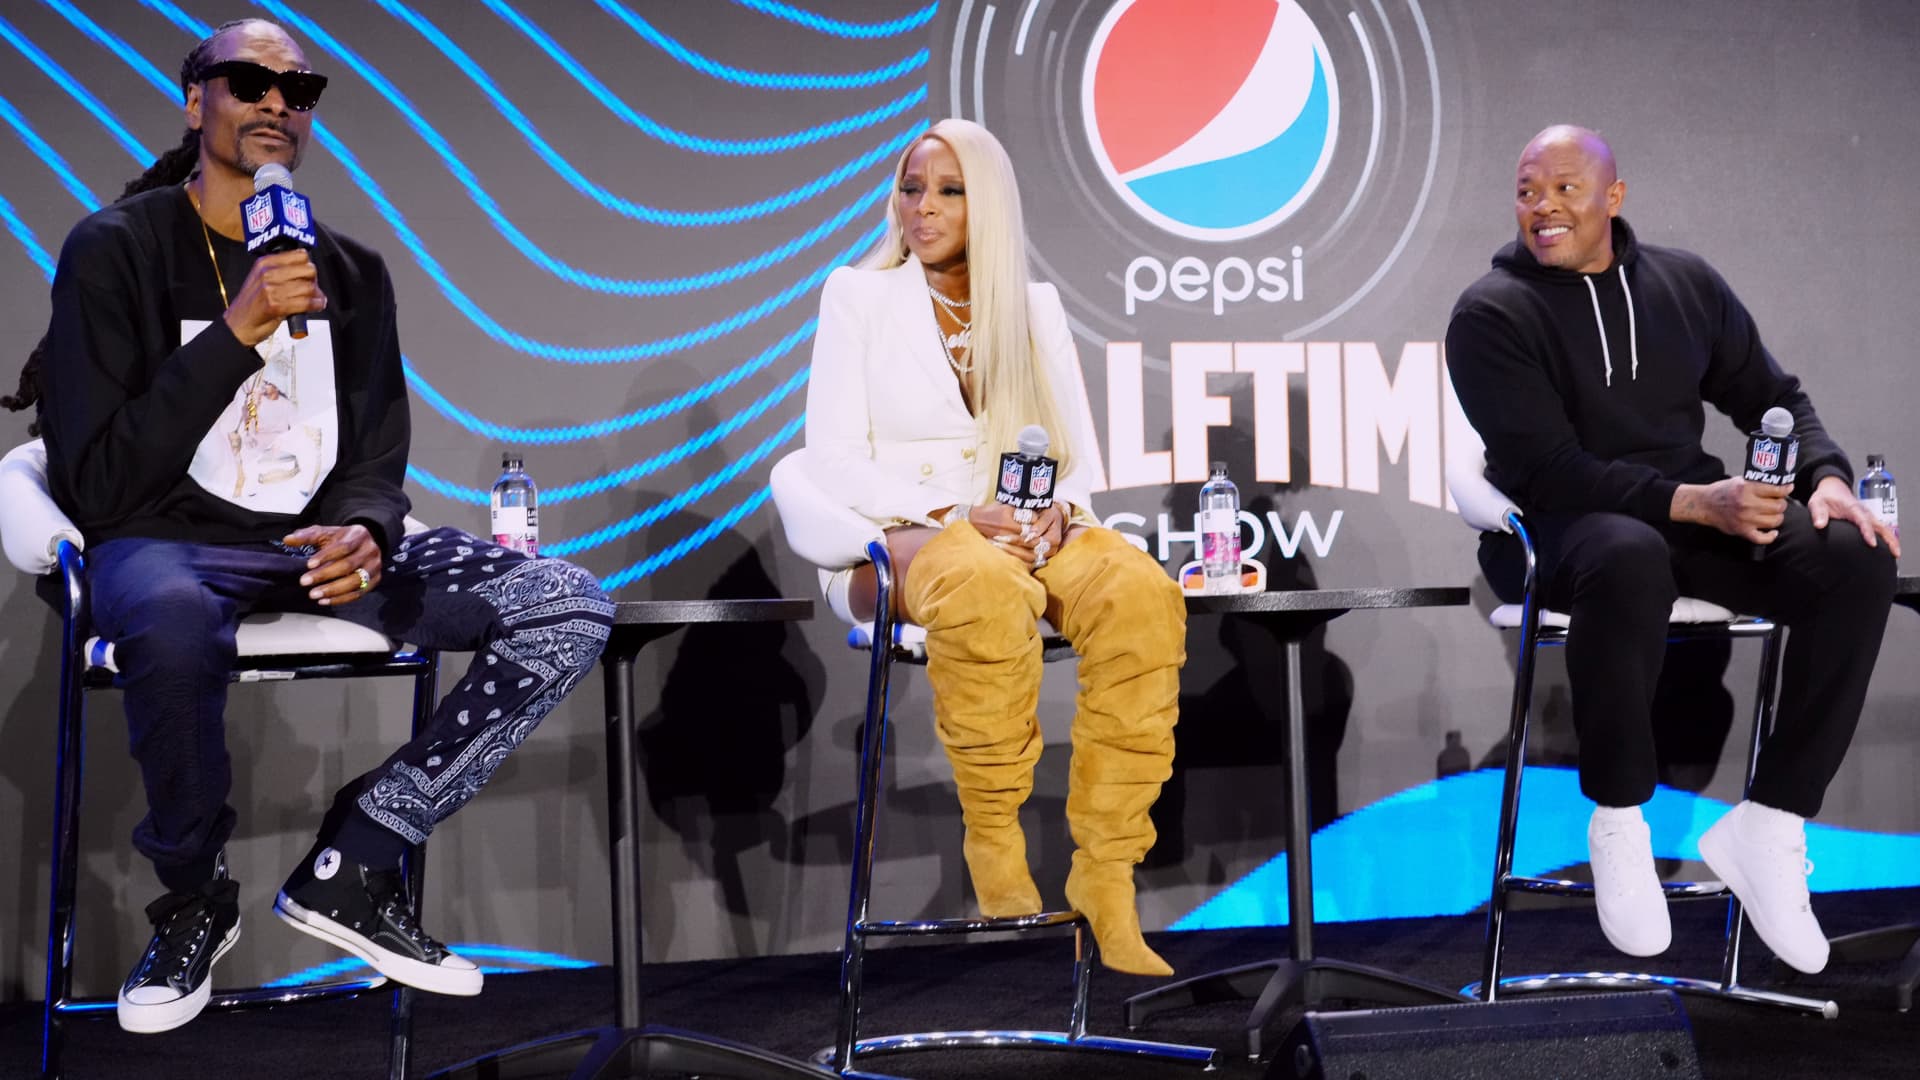 Snoop Dogg, Mary J. Blige, and Dr. Dre speak during the Pepsi Super Bowl LVI Halftime Show Press Conference at Los Angeles Convention Center on February 10, 2022 in Los Angeles, California.